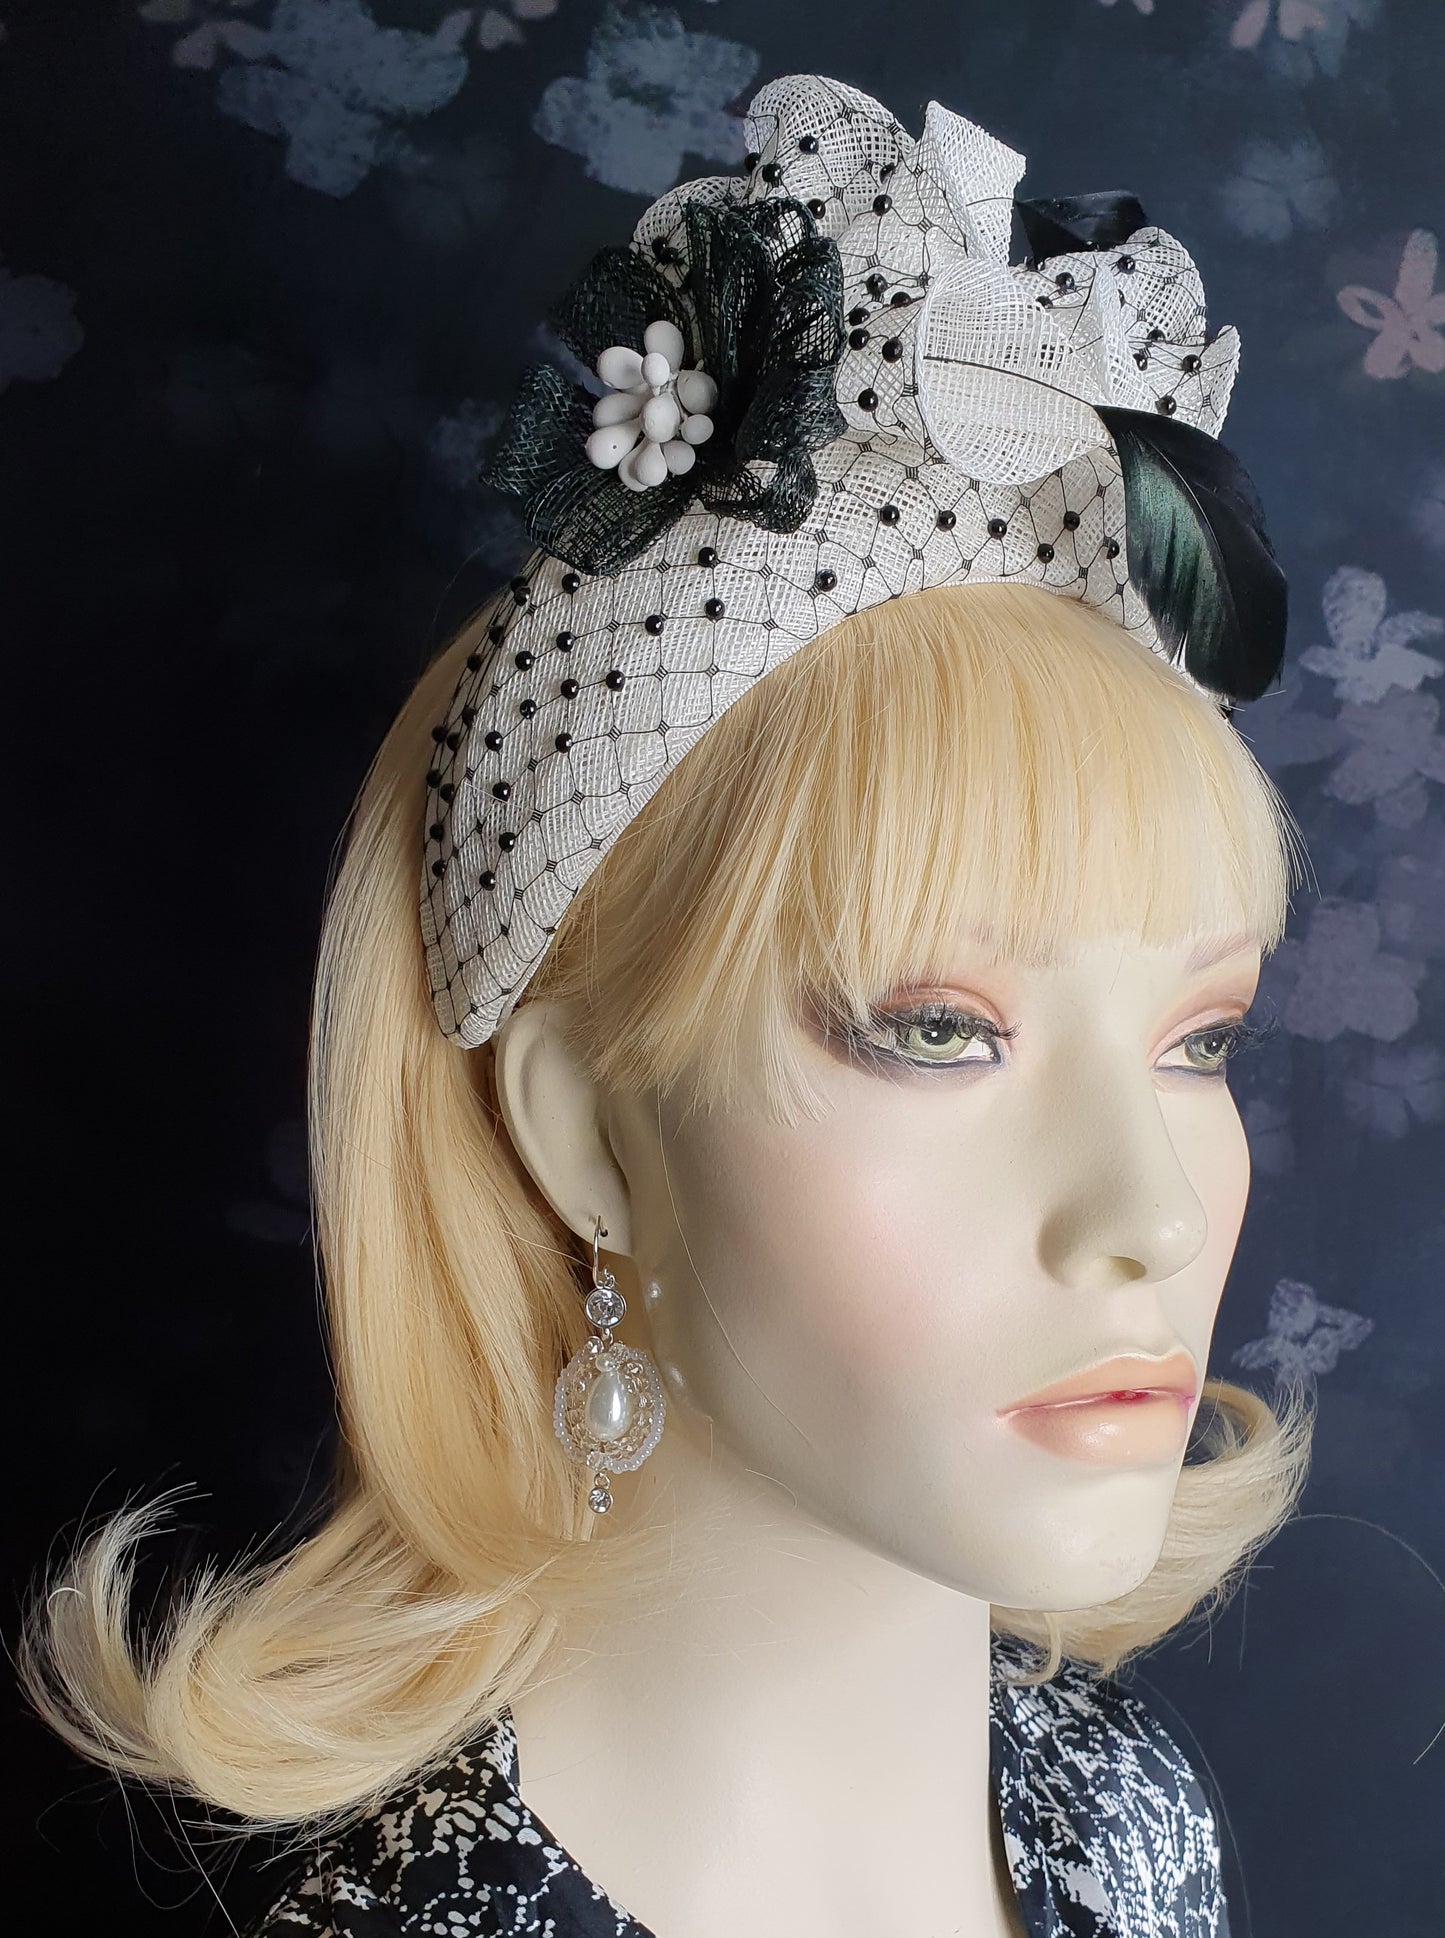 Elegant Handmade Hairband Diadem - Black and White with Feathers and Stamens - Suitable for Special and Formal Occasions